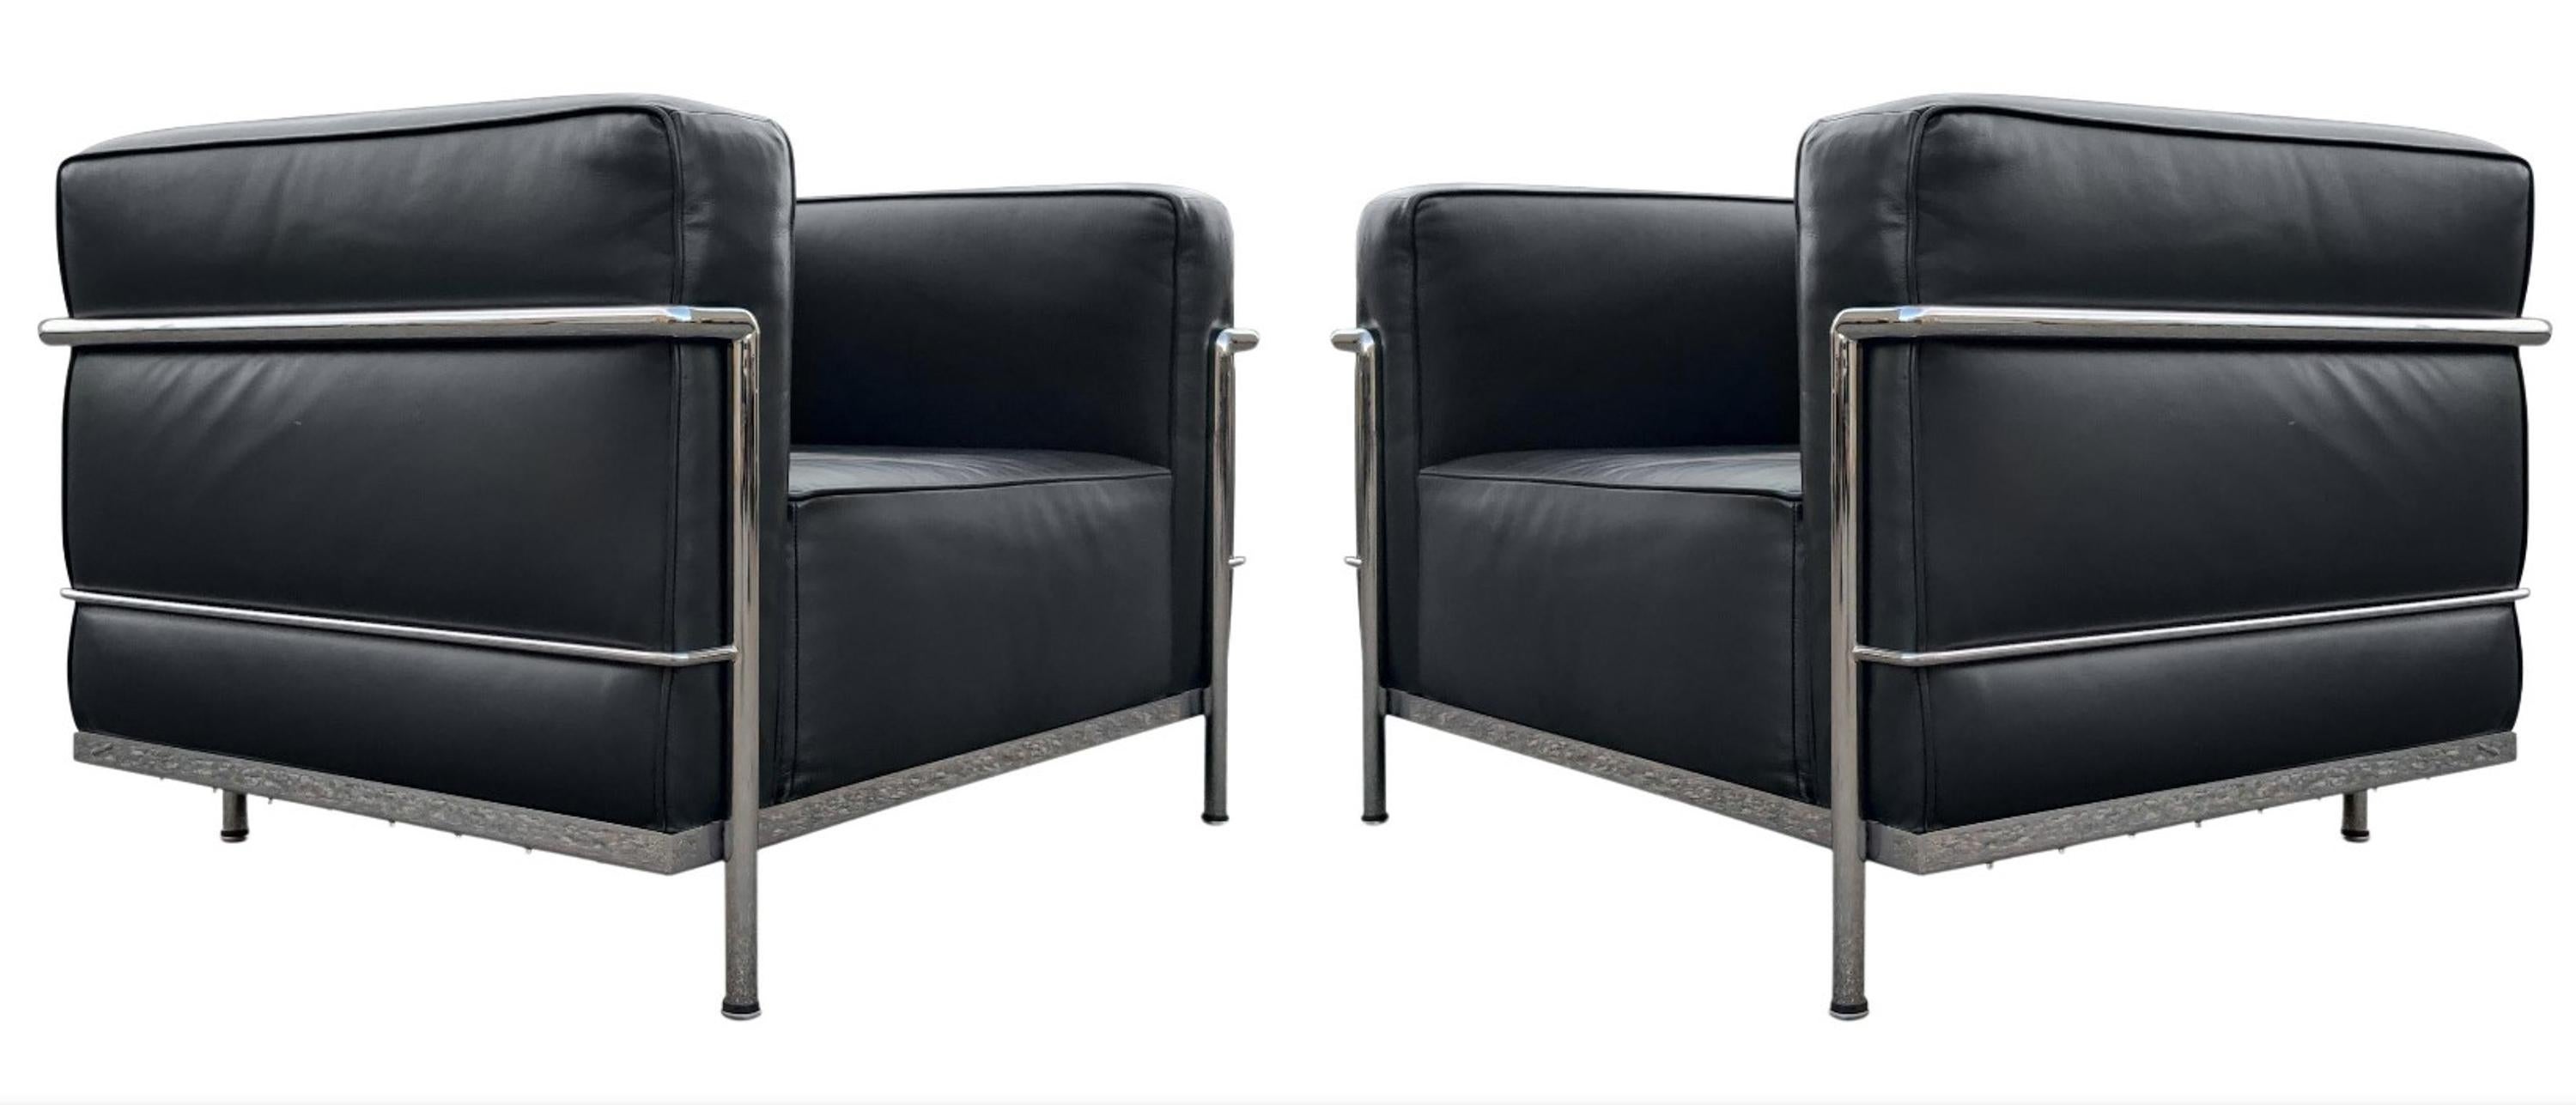 A pair of lounge or club chairs by Gordon International, in black leather upholstery and triple chrome-plated steel frames. Each chair is signed Gordon International beneath and in like new condition! Super clean and super comfortable! 

W 39